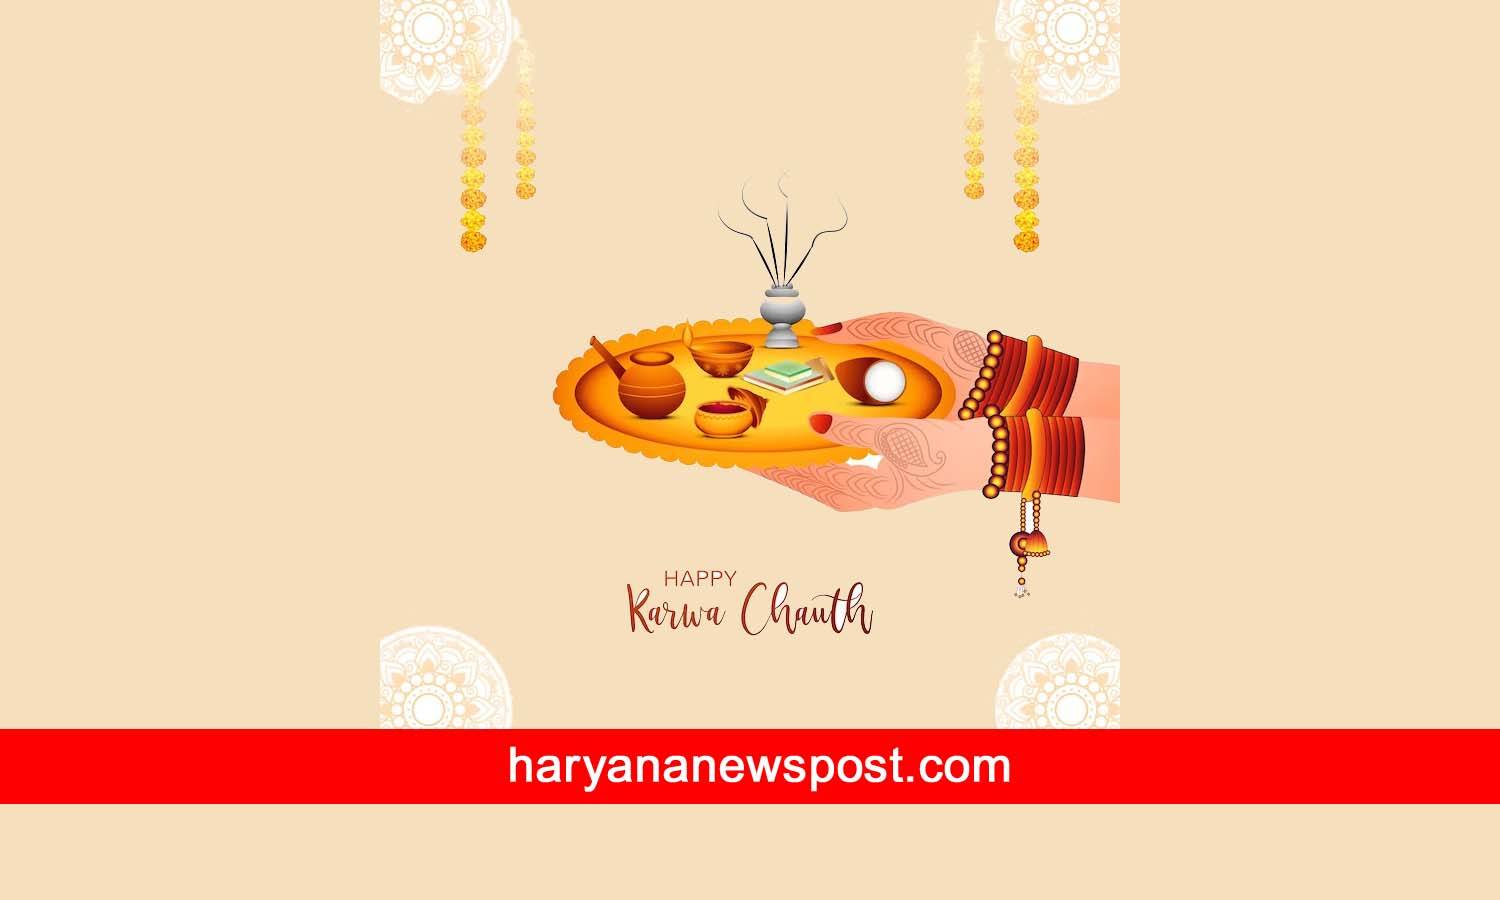 Best Karwa Chauth Captions for Instagram, FB Captions